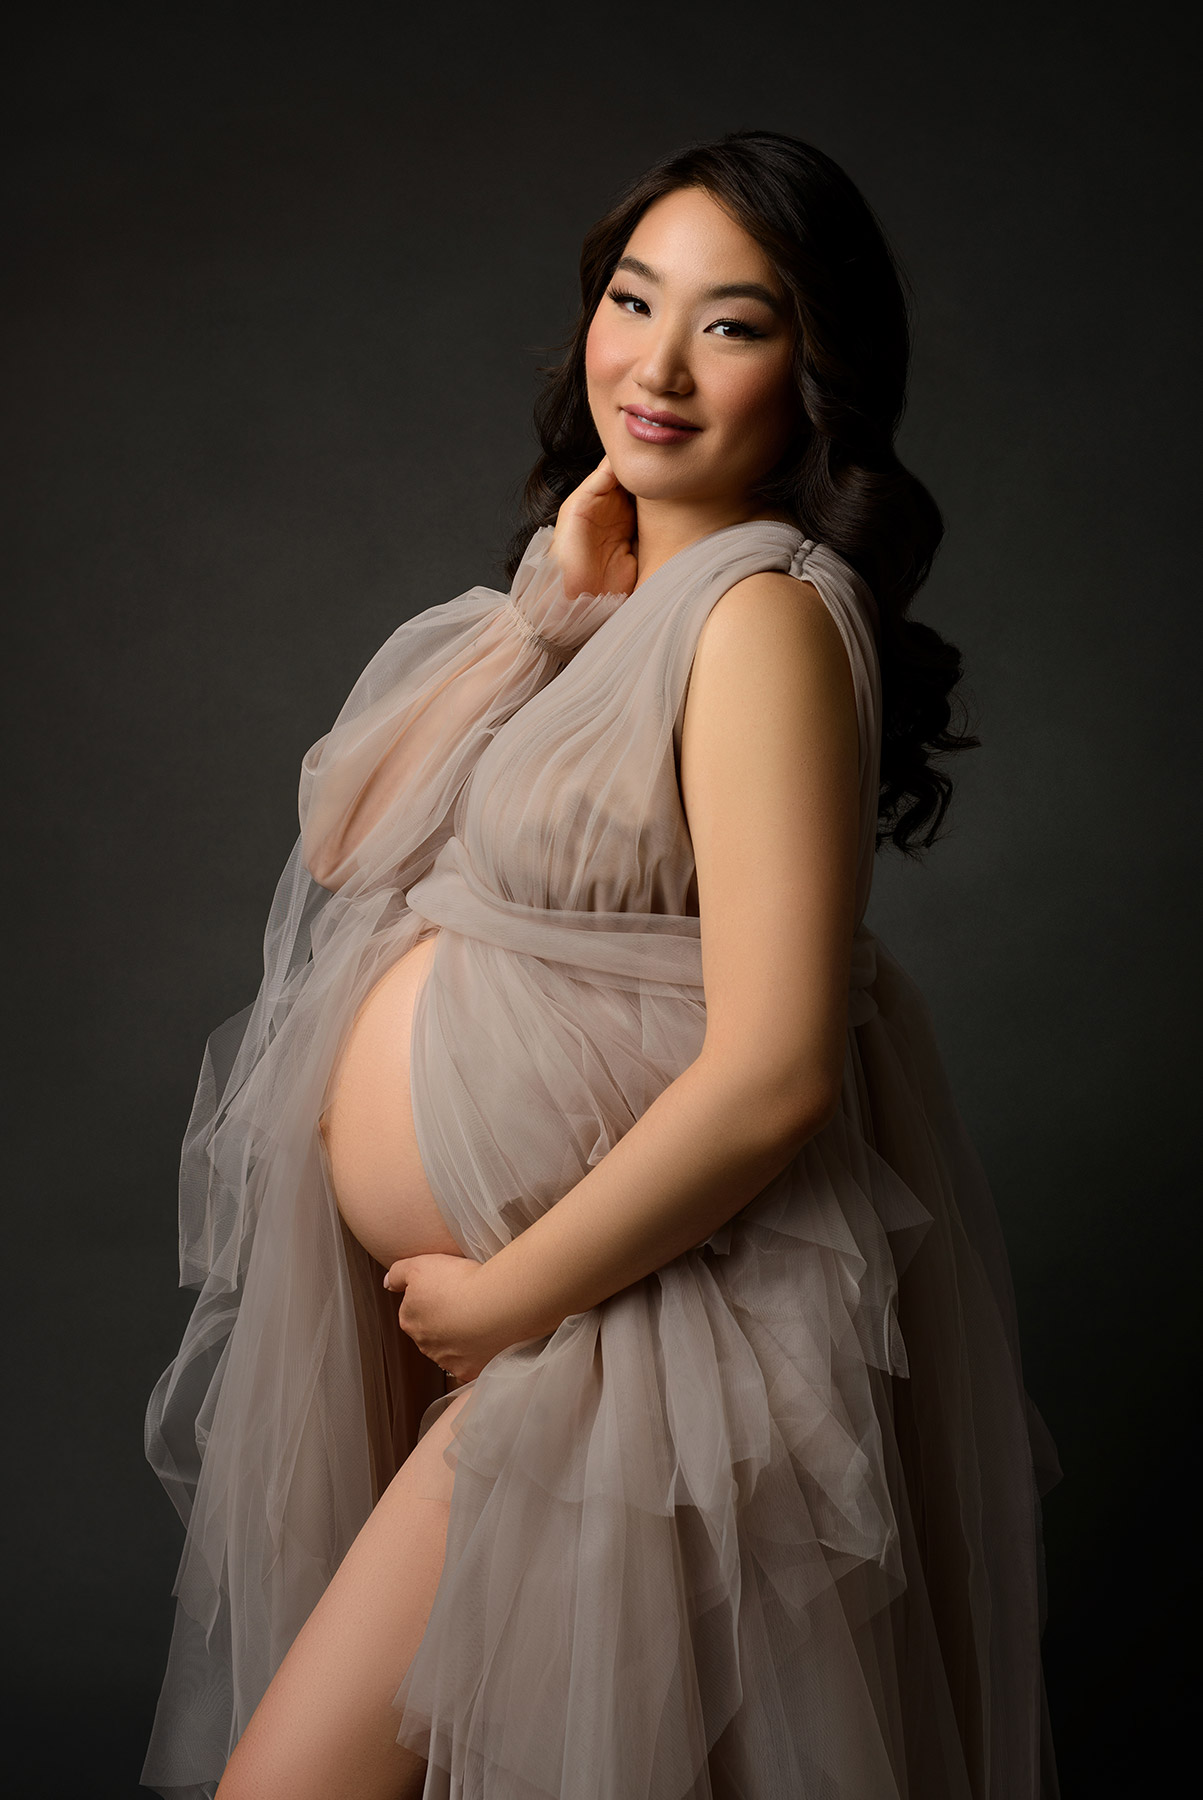 Luxurious maternity photo of Asian woman wearing tulle gown and smiling at the camera on a dark grey back drop.